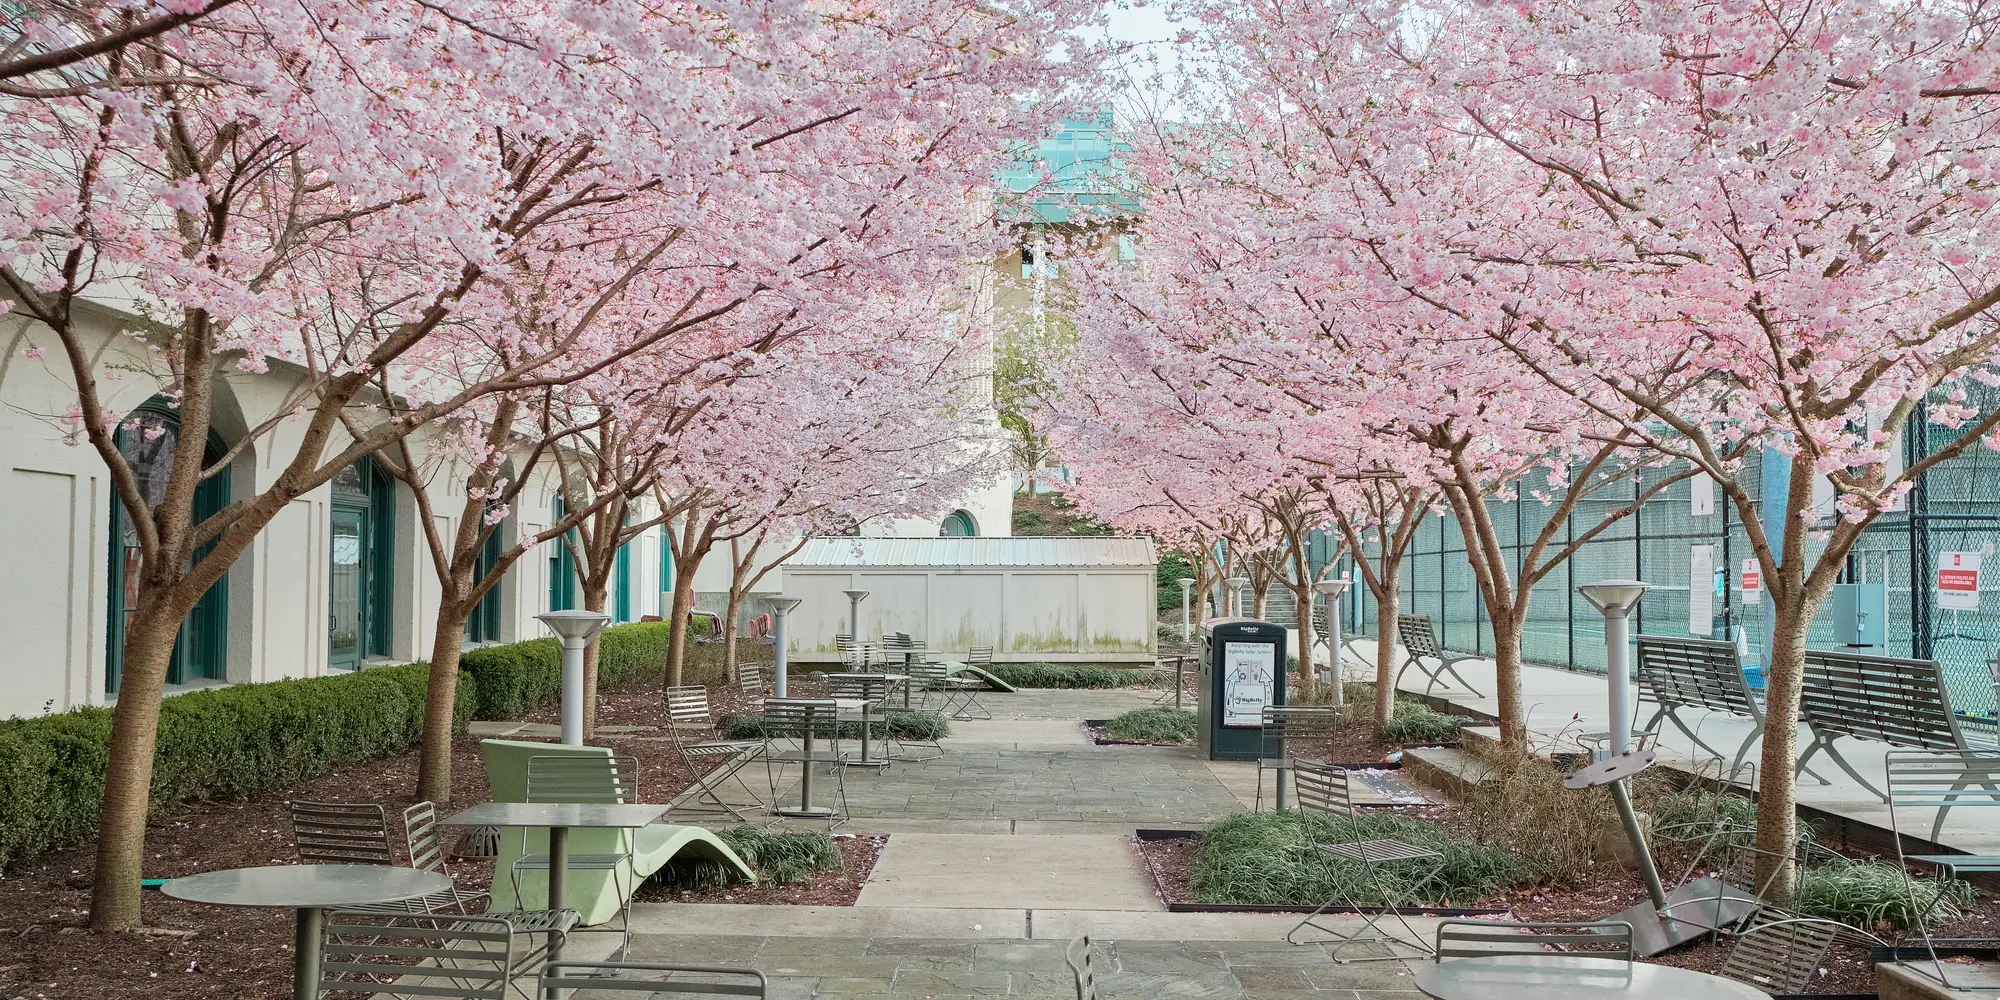 Courtyard view of trees in the spring